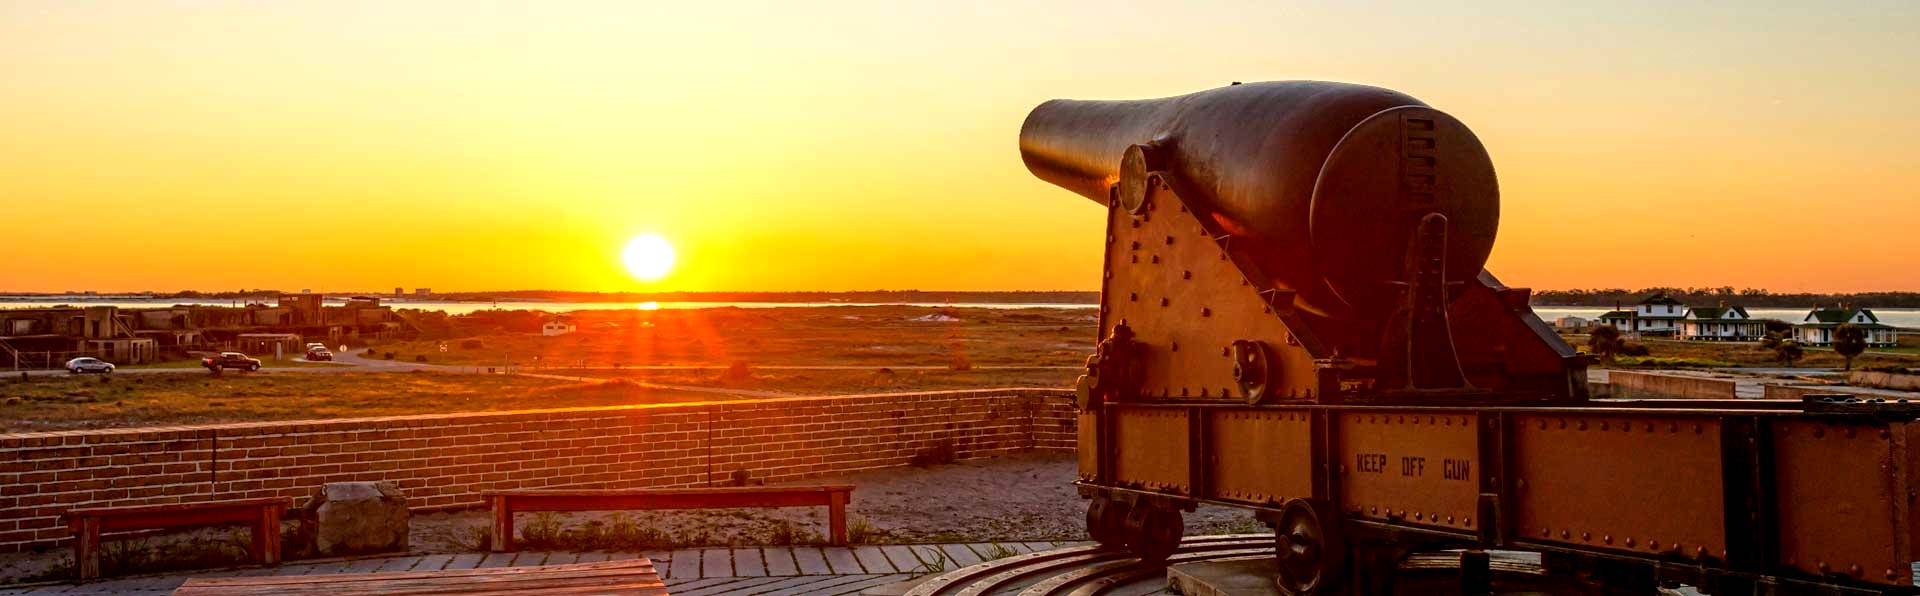 Old Cannon Gun at Fort Pickens